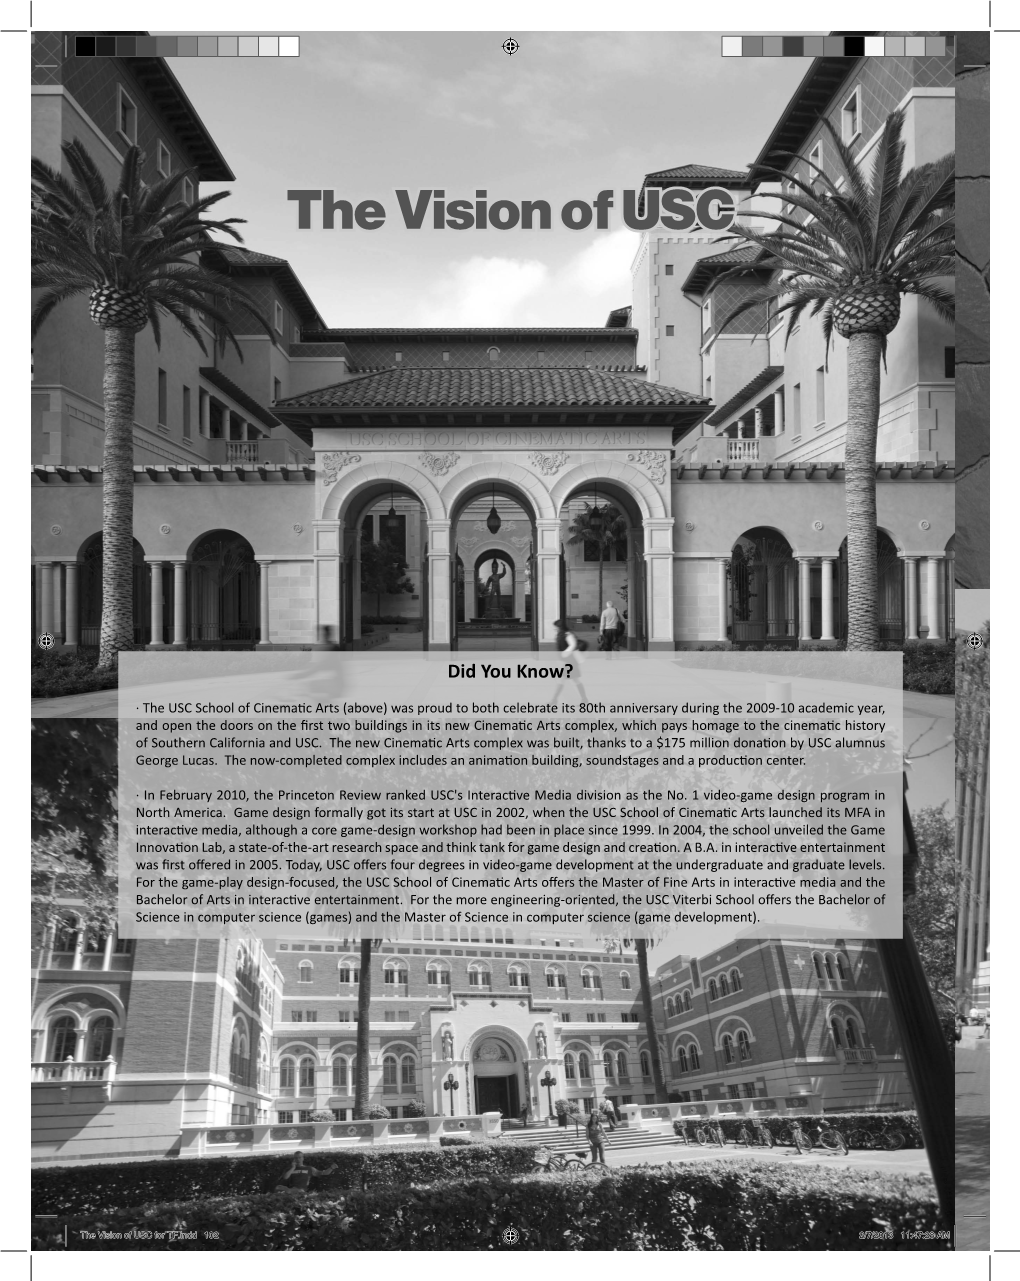 The Vision of USC